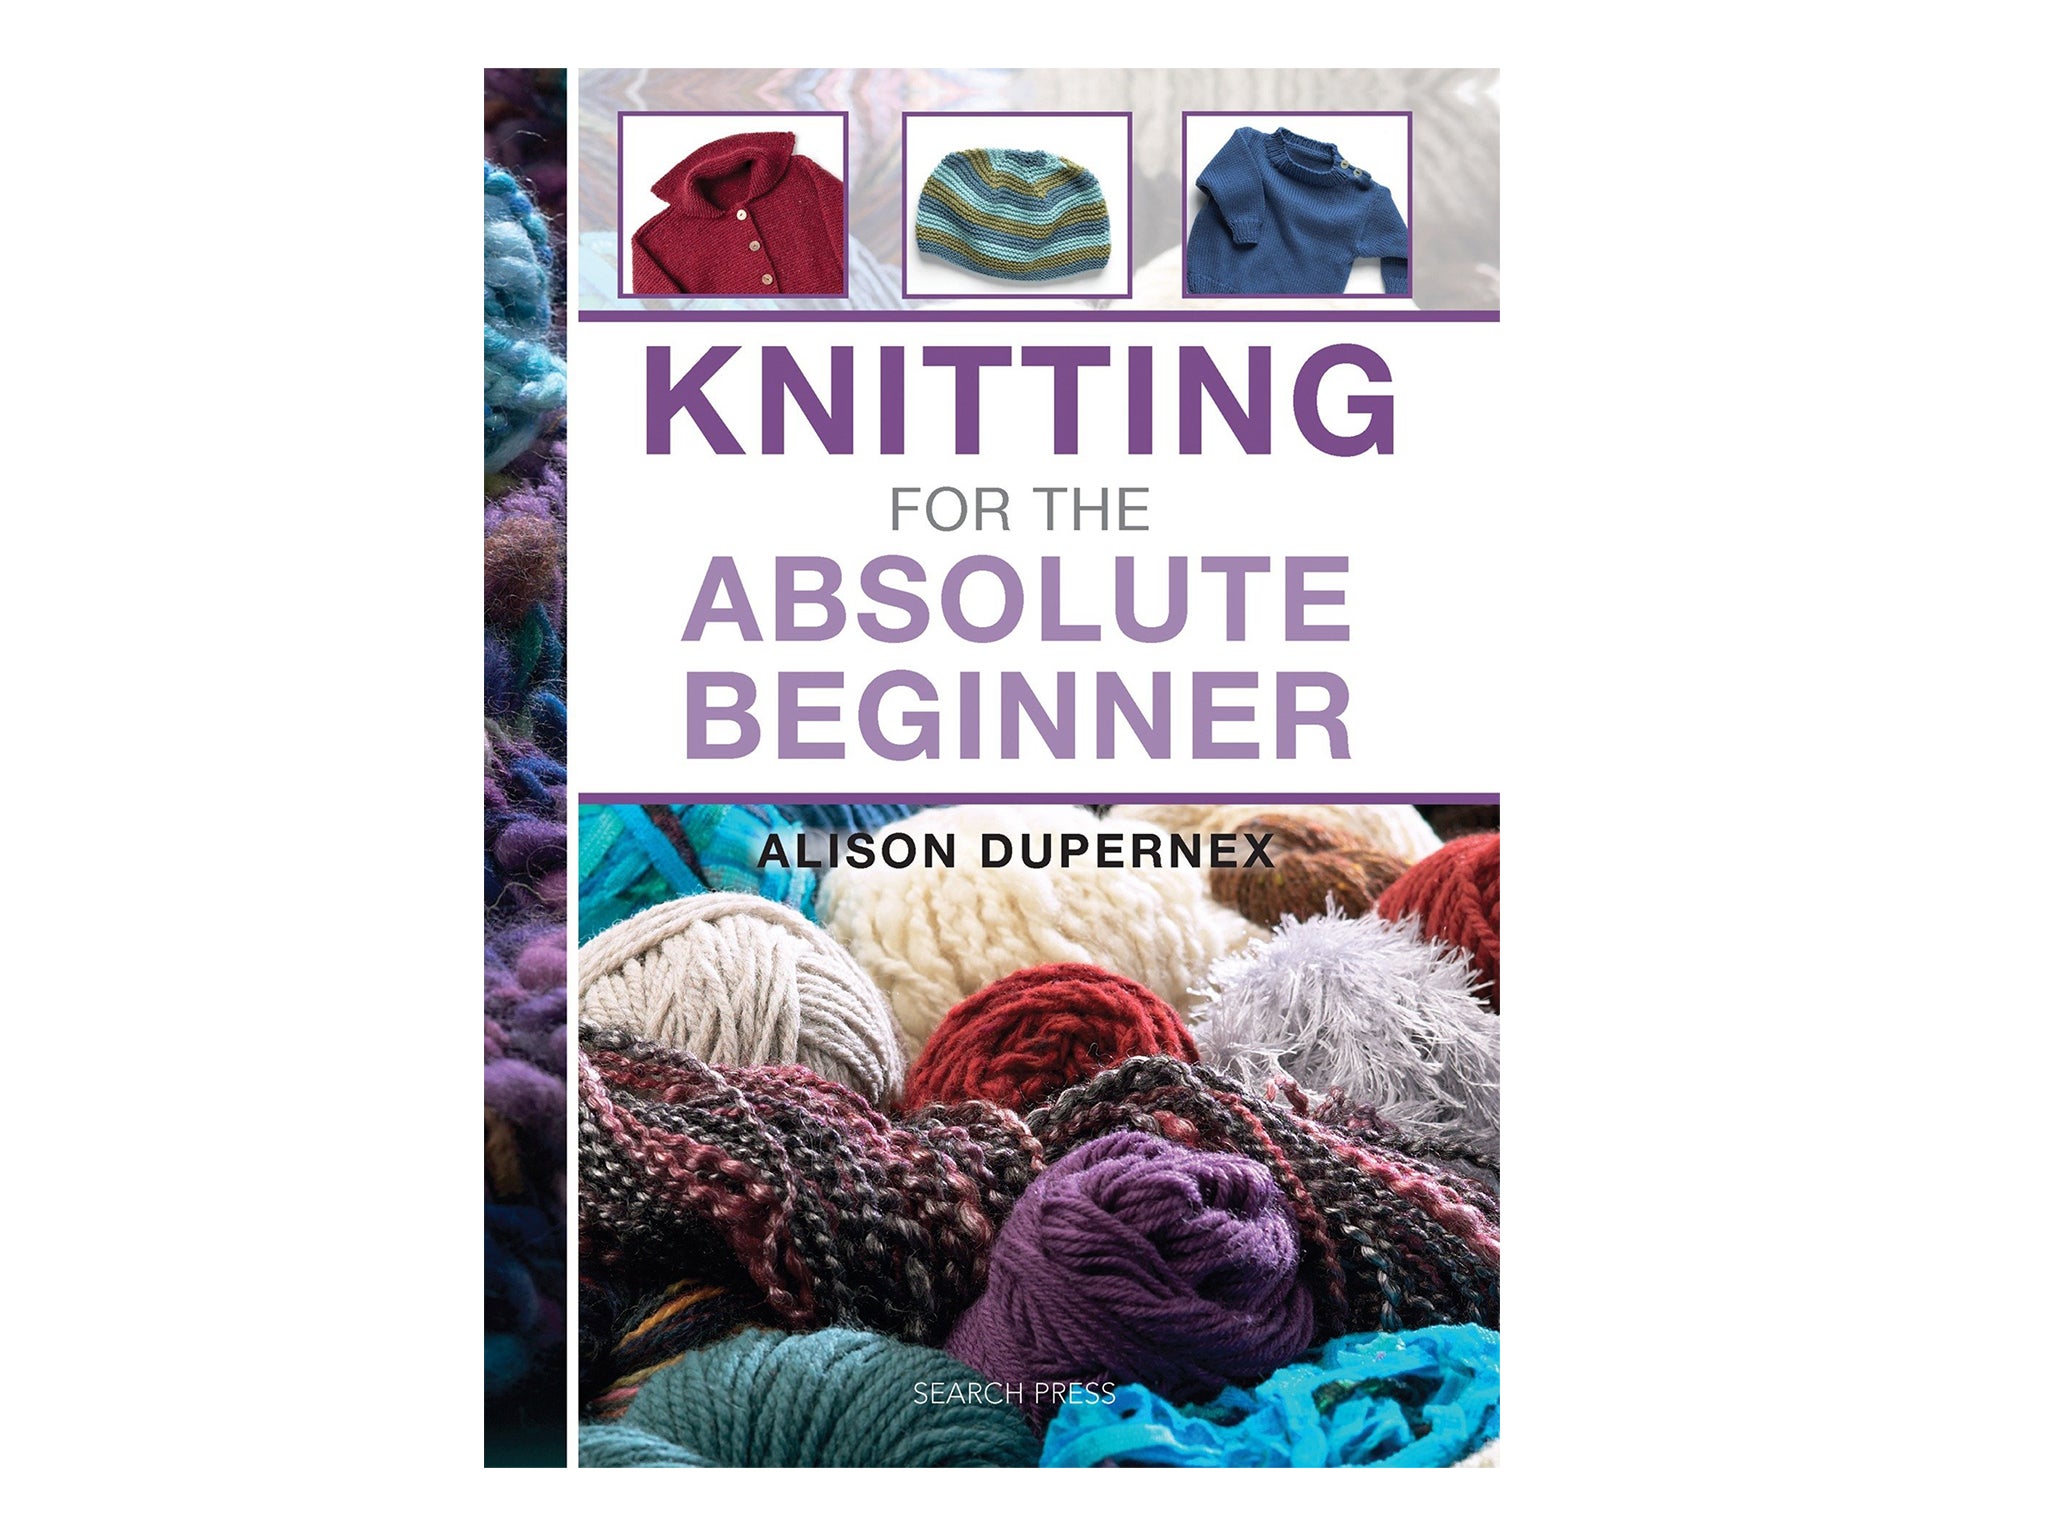 Knitting for beginners: Make clothes, gifts and more